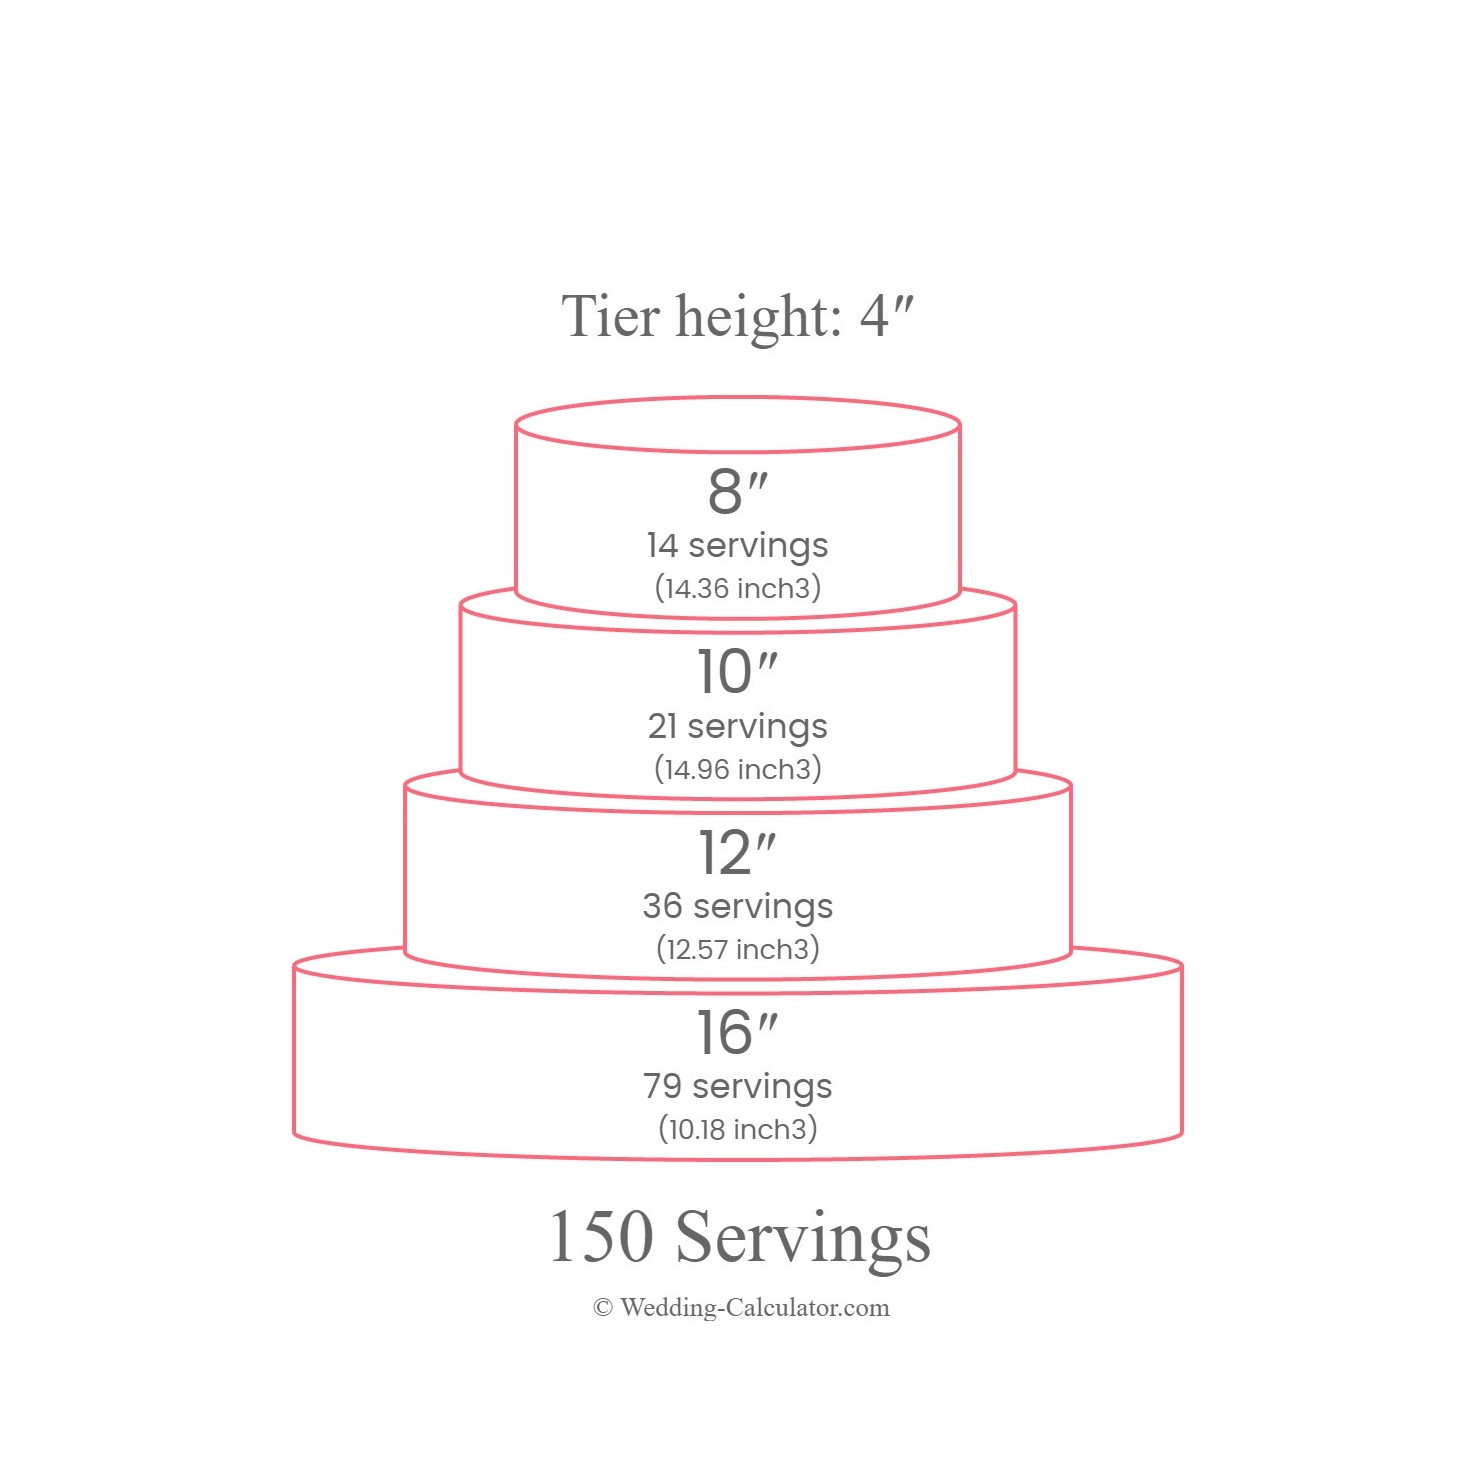 Another wedding cake size for 150 people